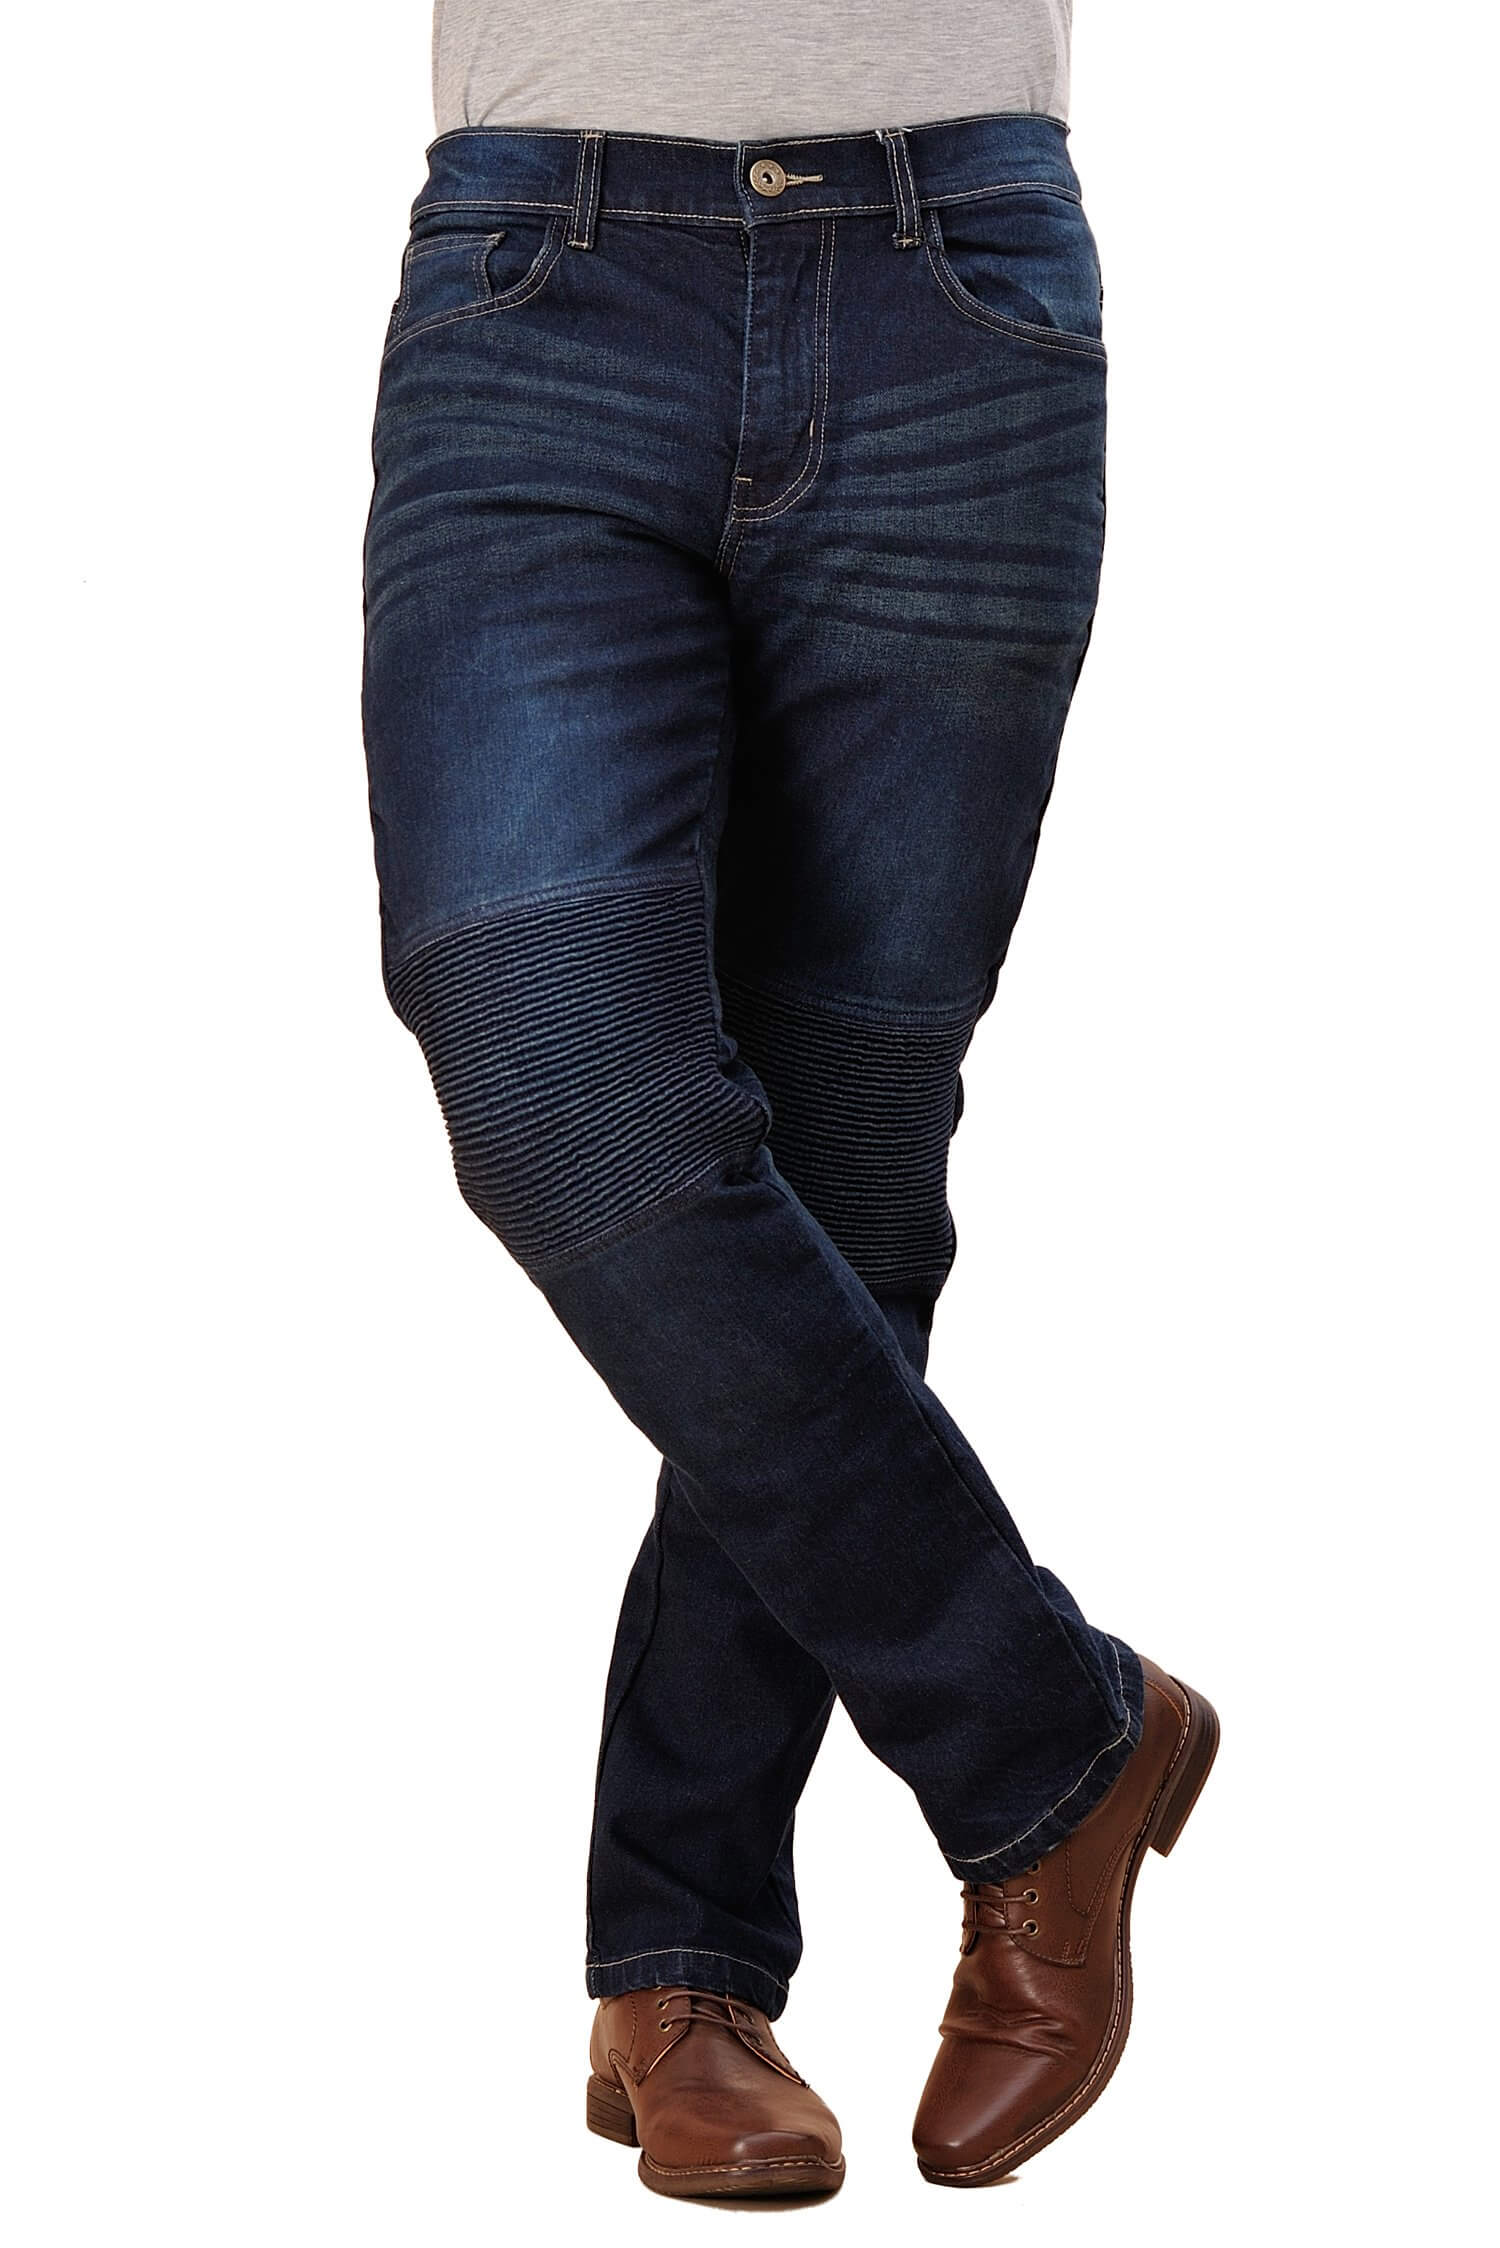 stretch-motorcycle-jeans-pants-12